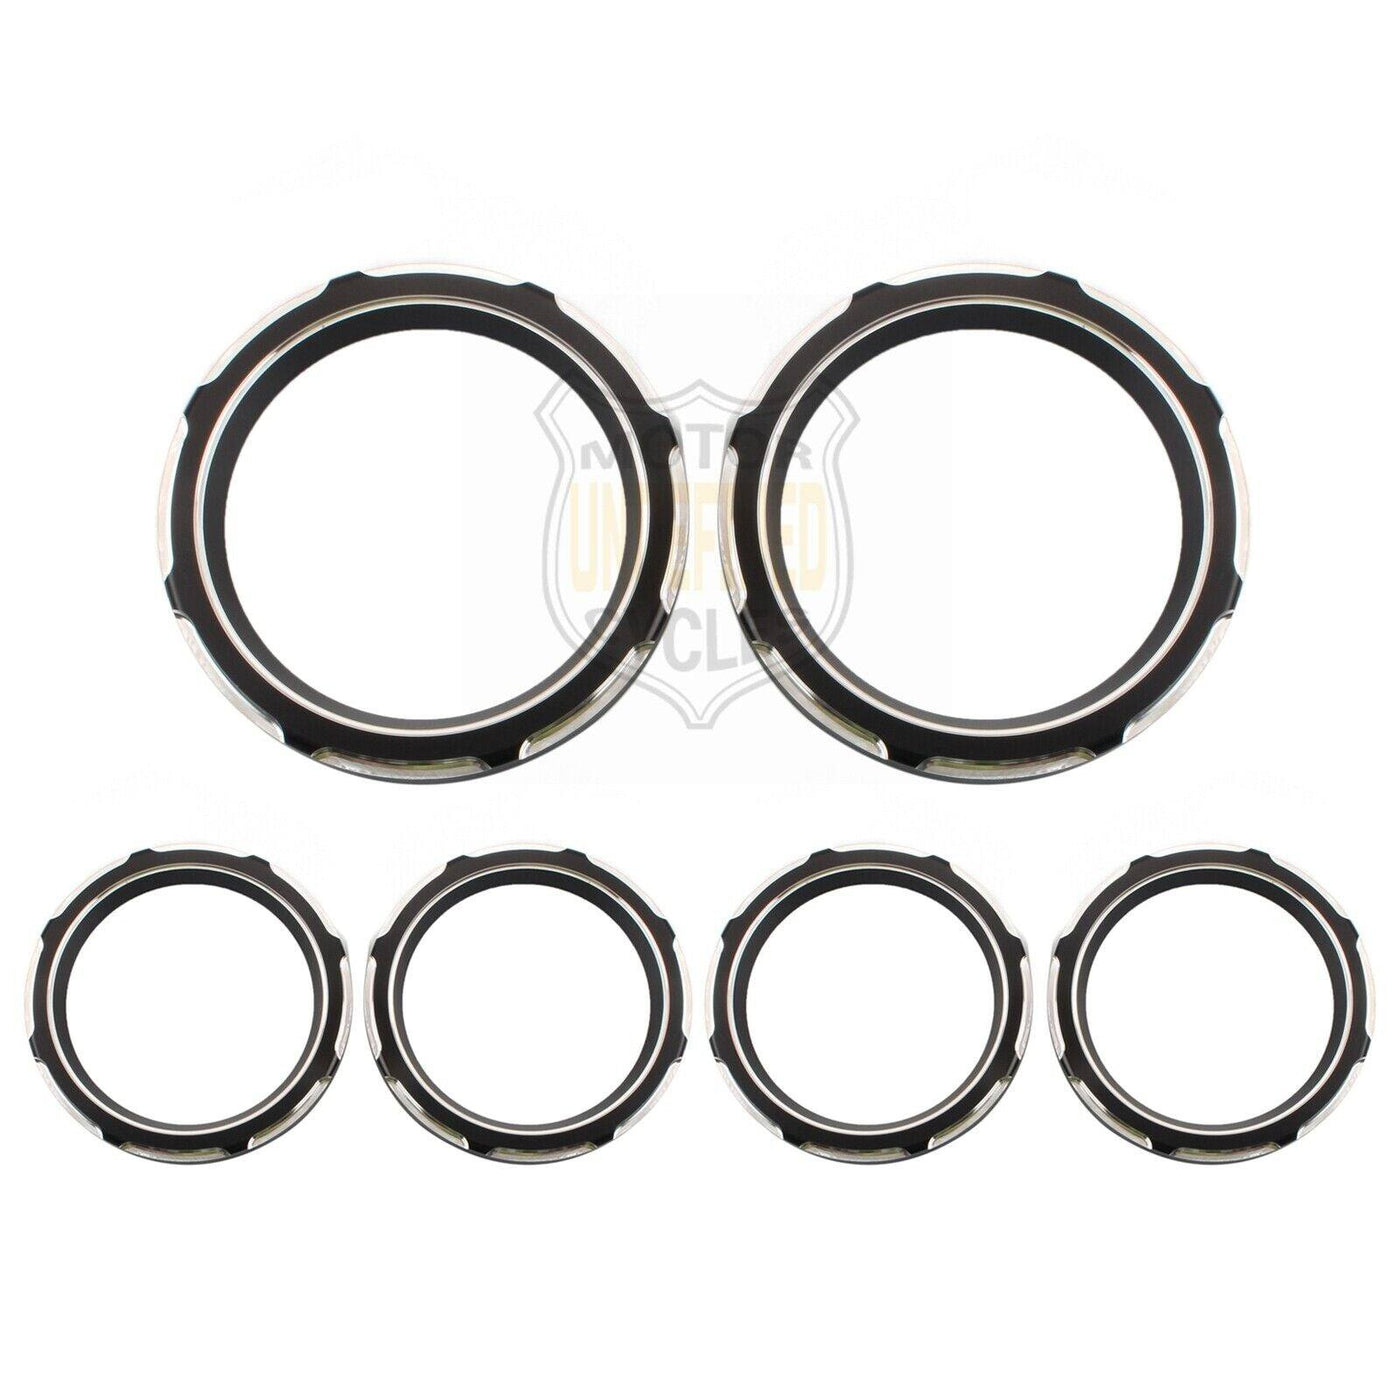 Black Instrument Board Gauge Bezel Covers For Harley Electra Street Glide 96-13 - Moto Life Products